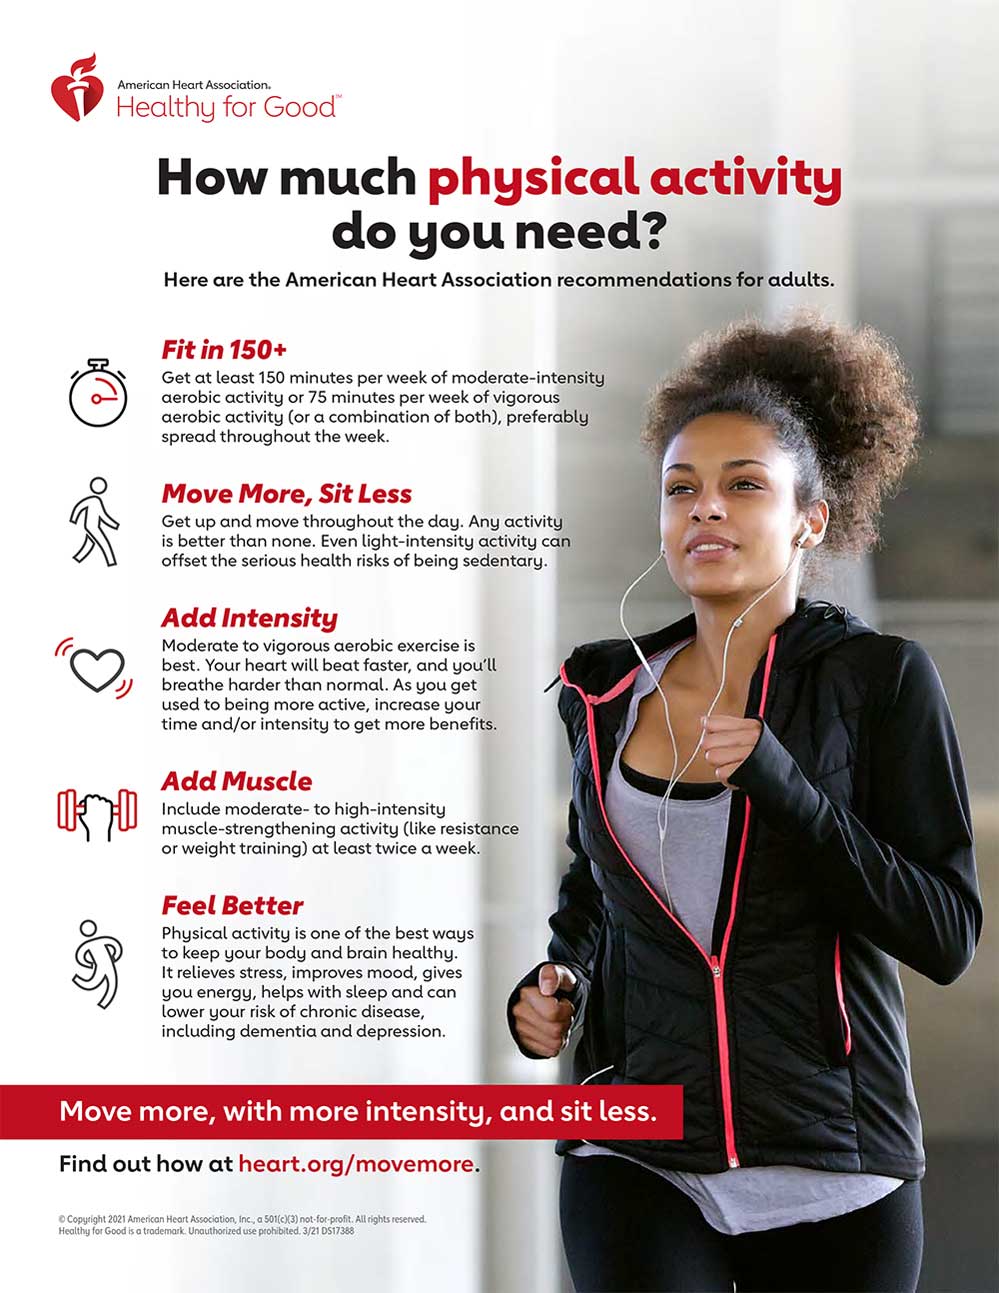 fitness: Does high-intensity exercise affect your heart? mind